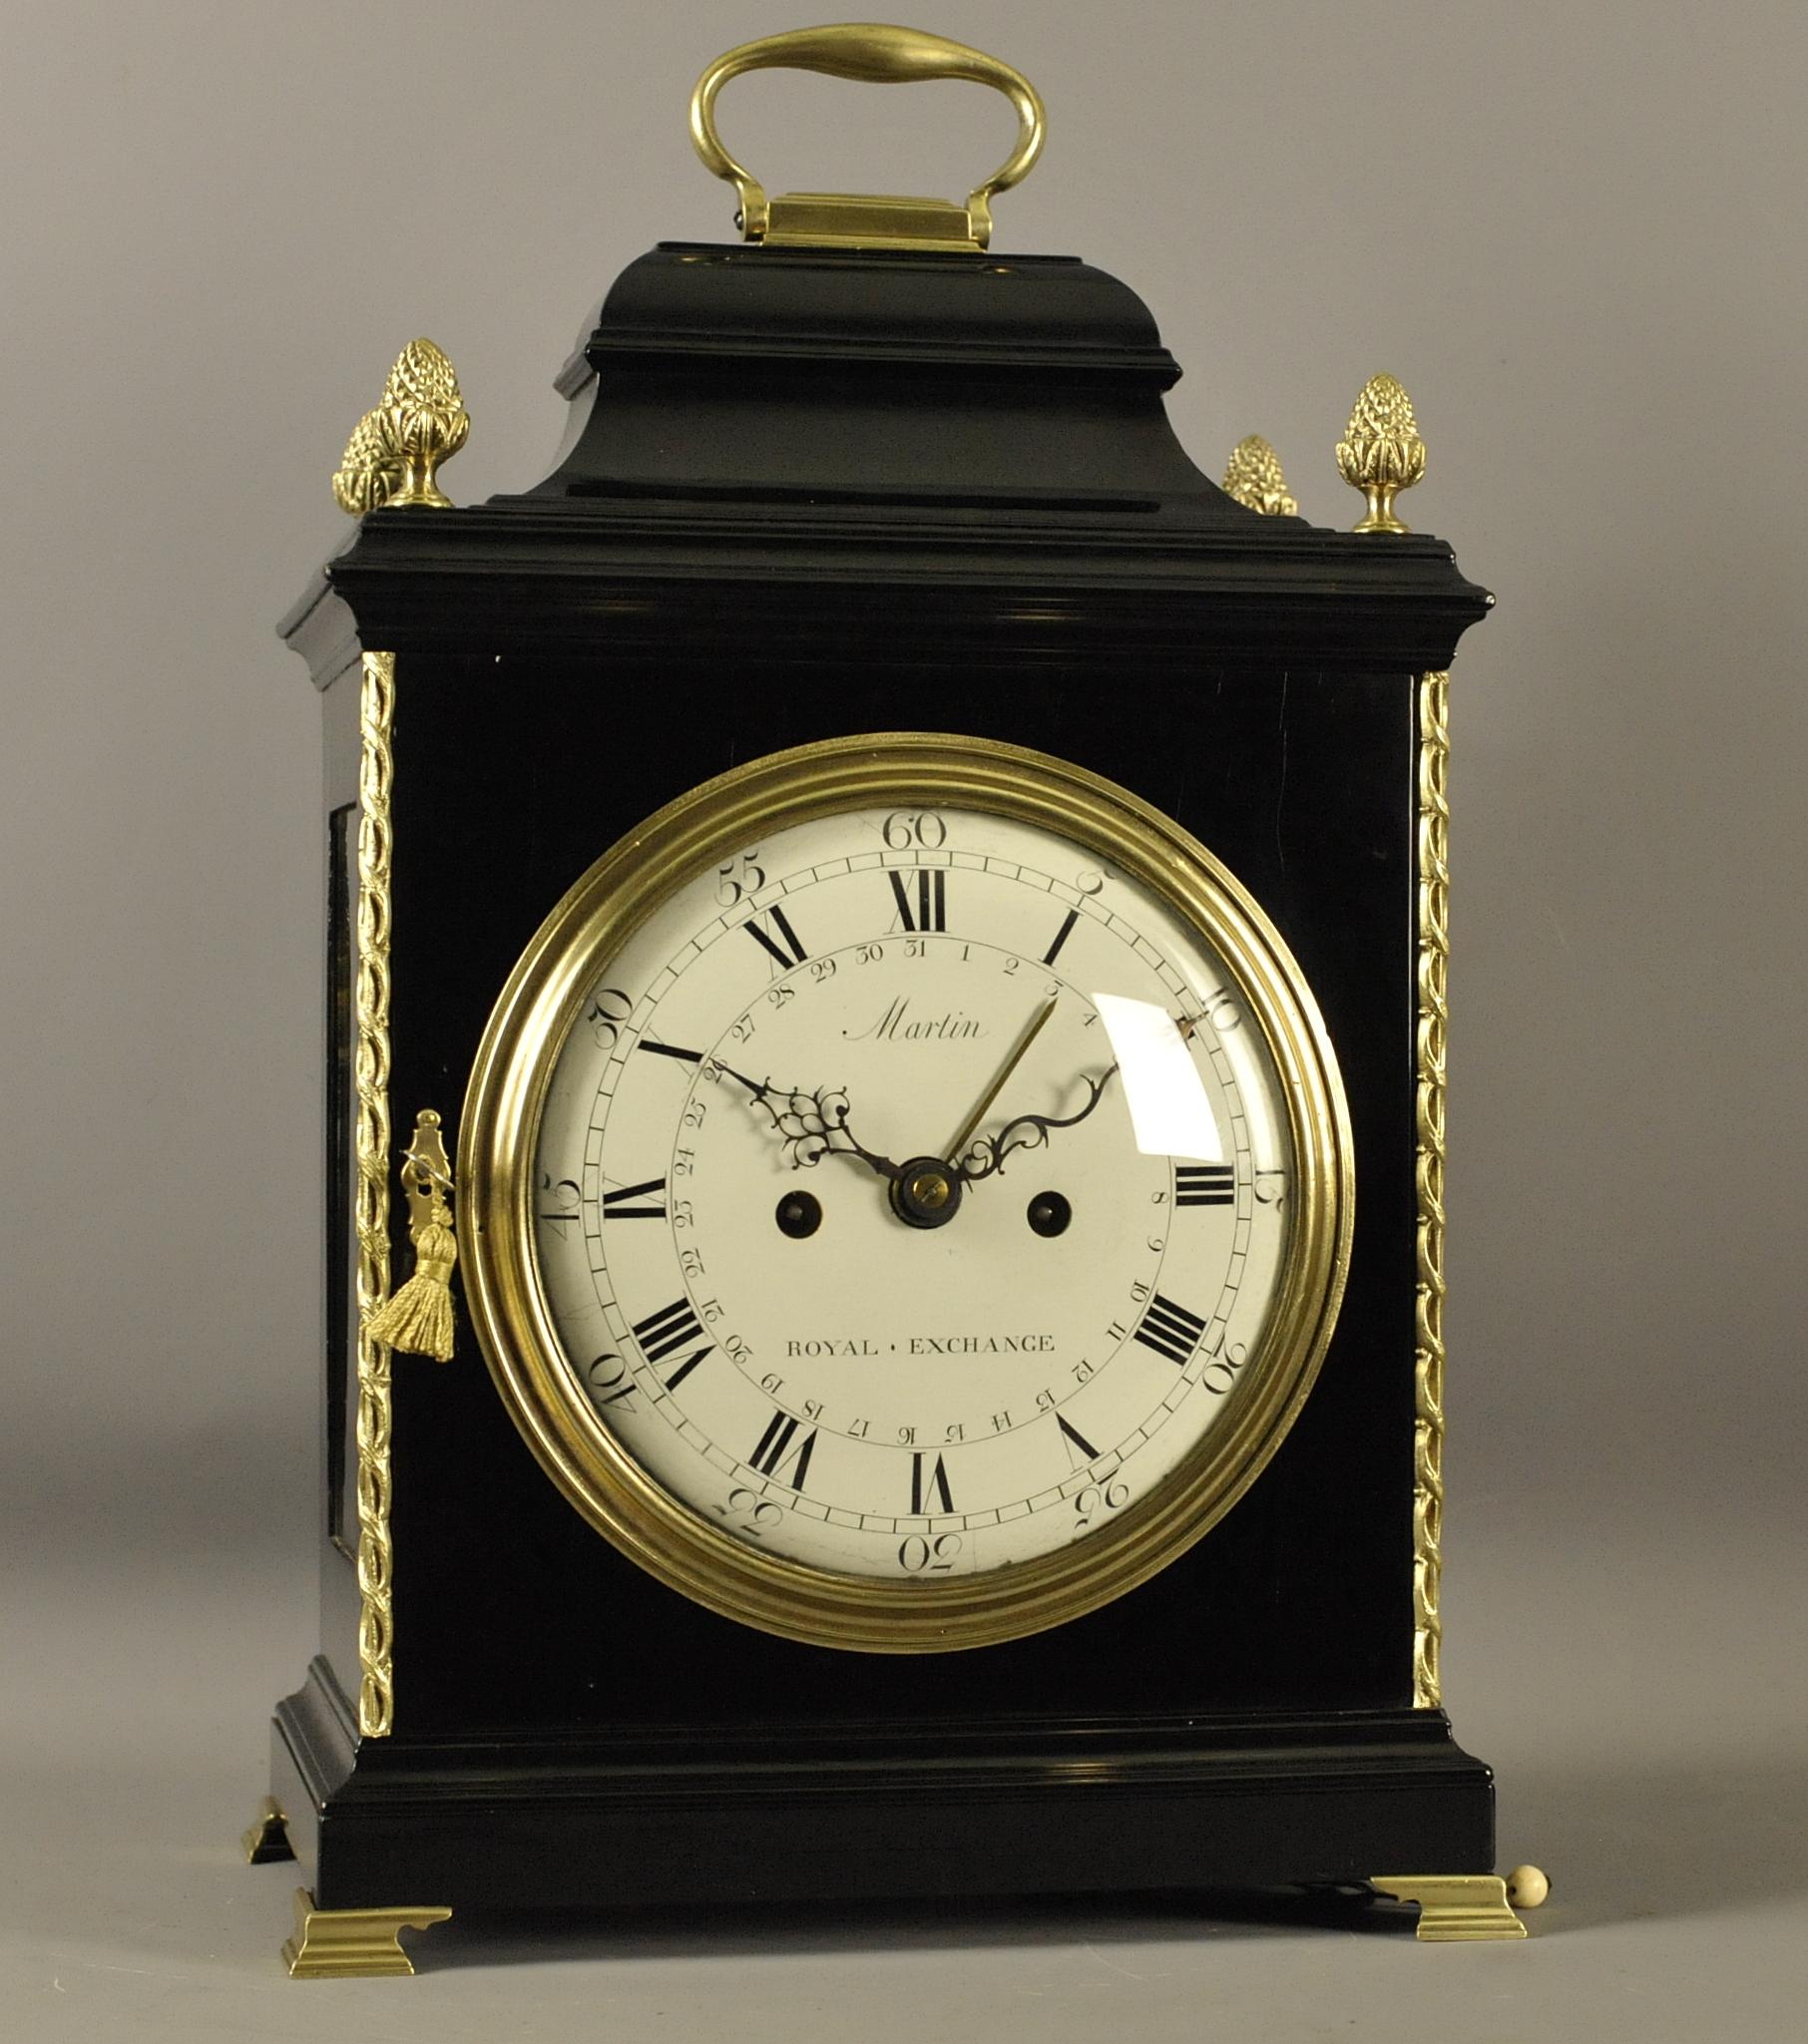 This is a very fine ebony veneered verge bracket clock by Martin, Royal exchange, London, circa 1780. Thomas Martin was one of a dynasty of fine clockmakers who can be traced back to 1668. Thomas himself was admitted to the clockmakers company in